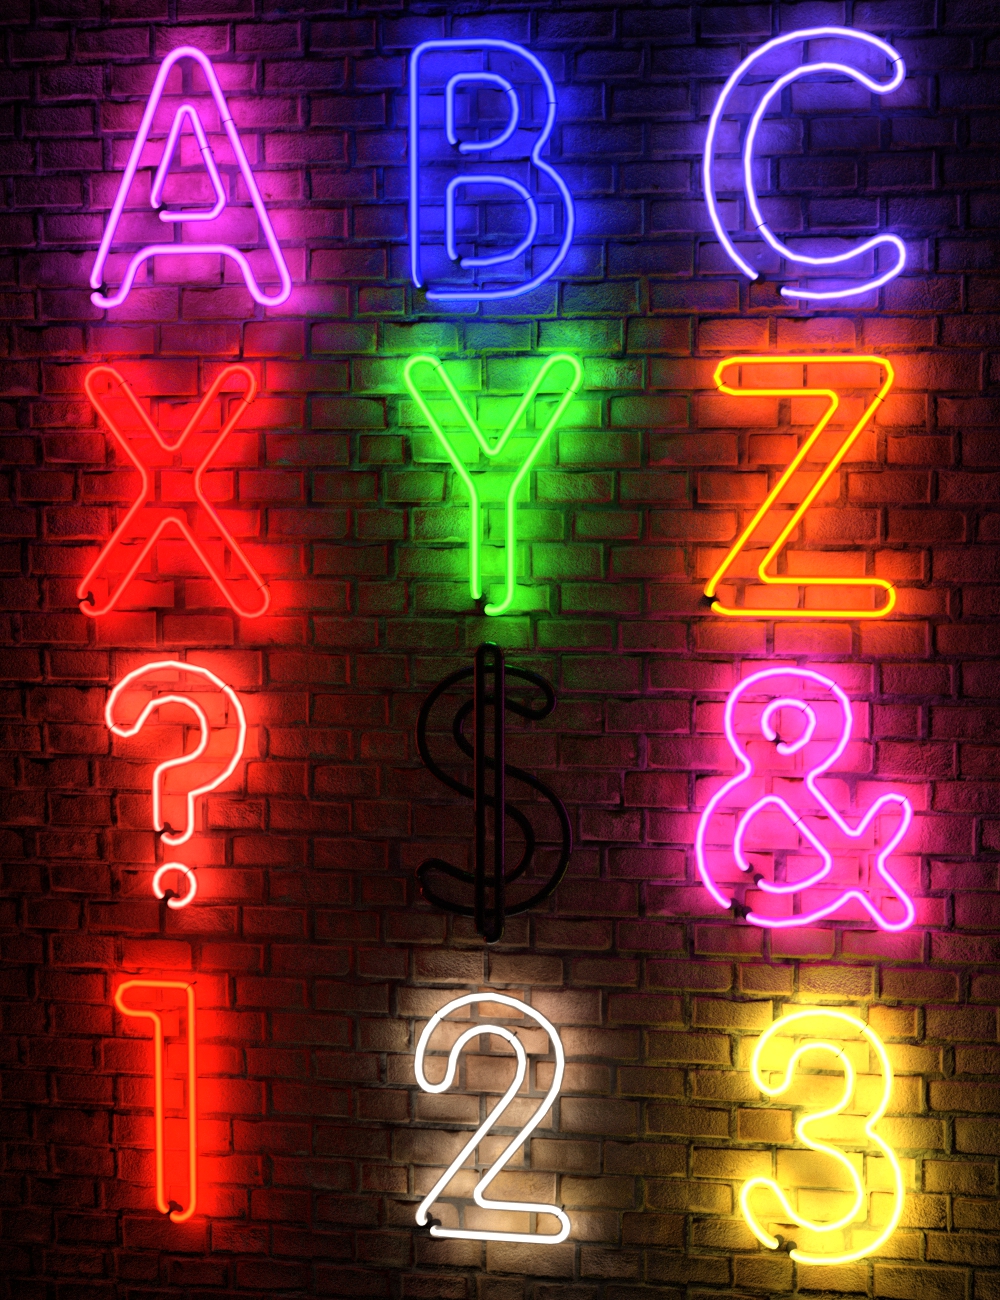 Real Neon Letters by: DzFire, 3D Models by Daz 3D